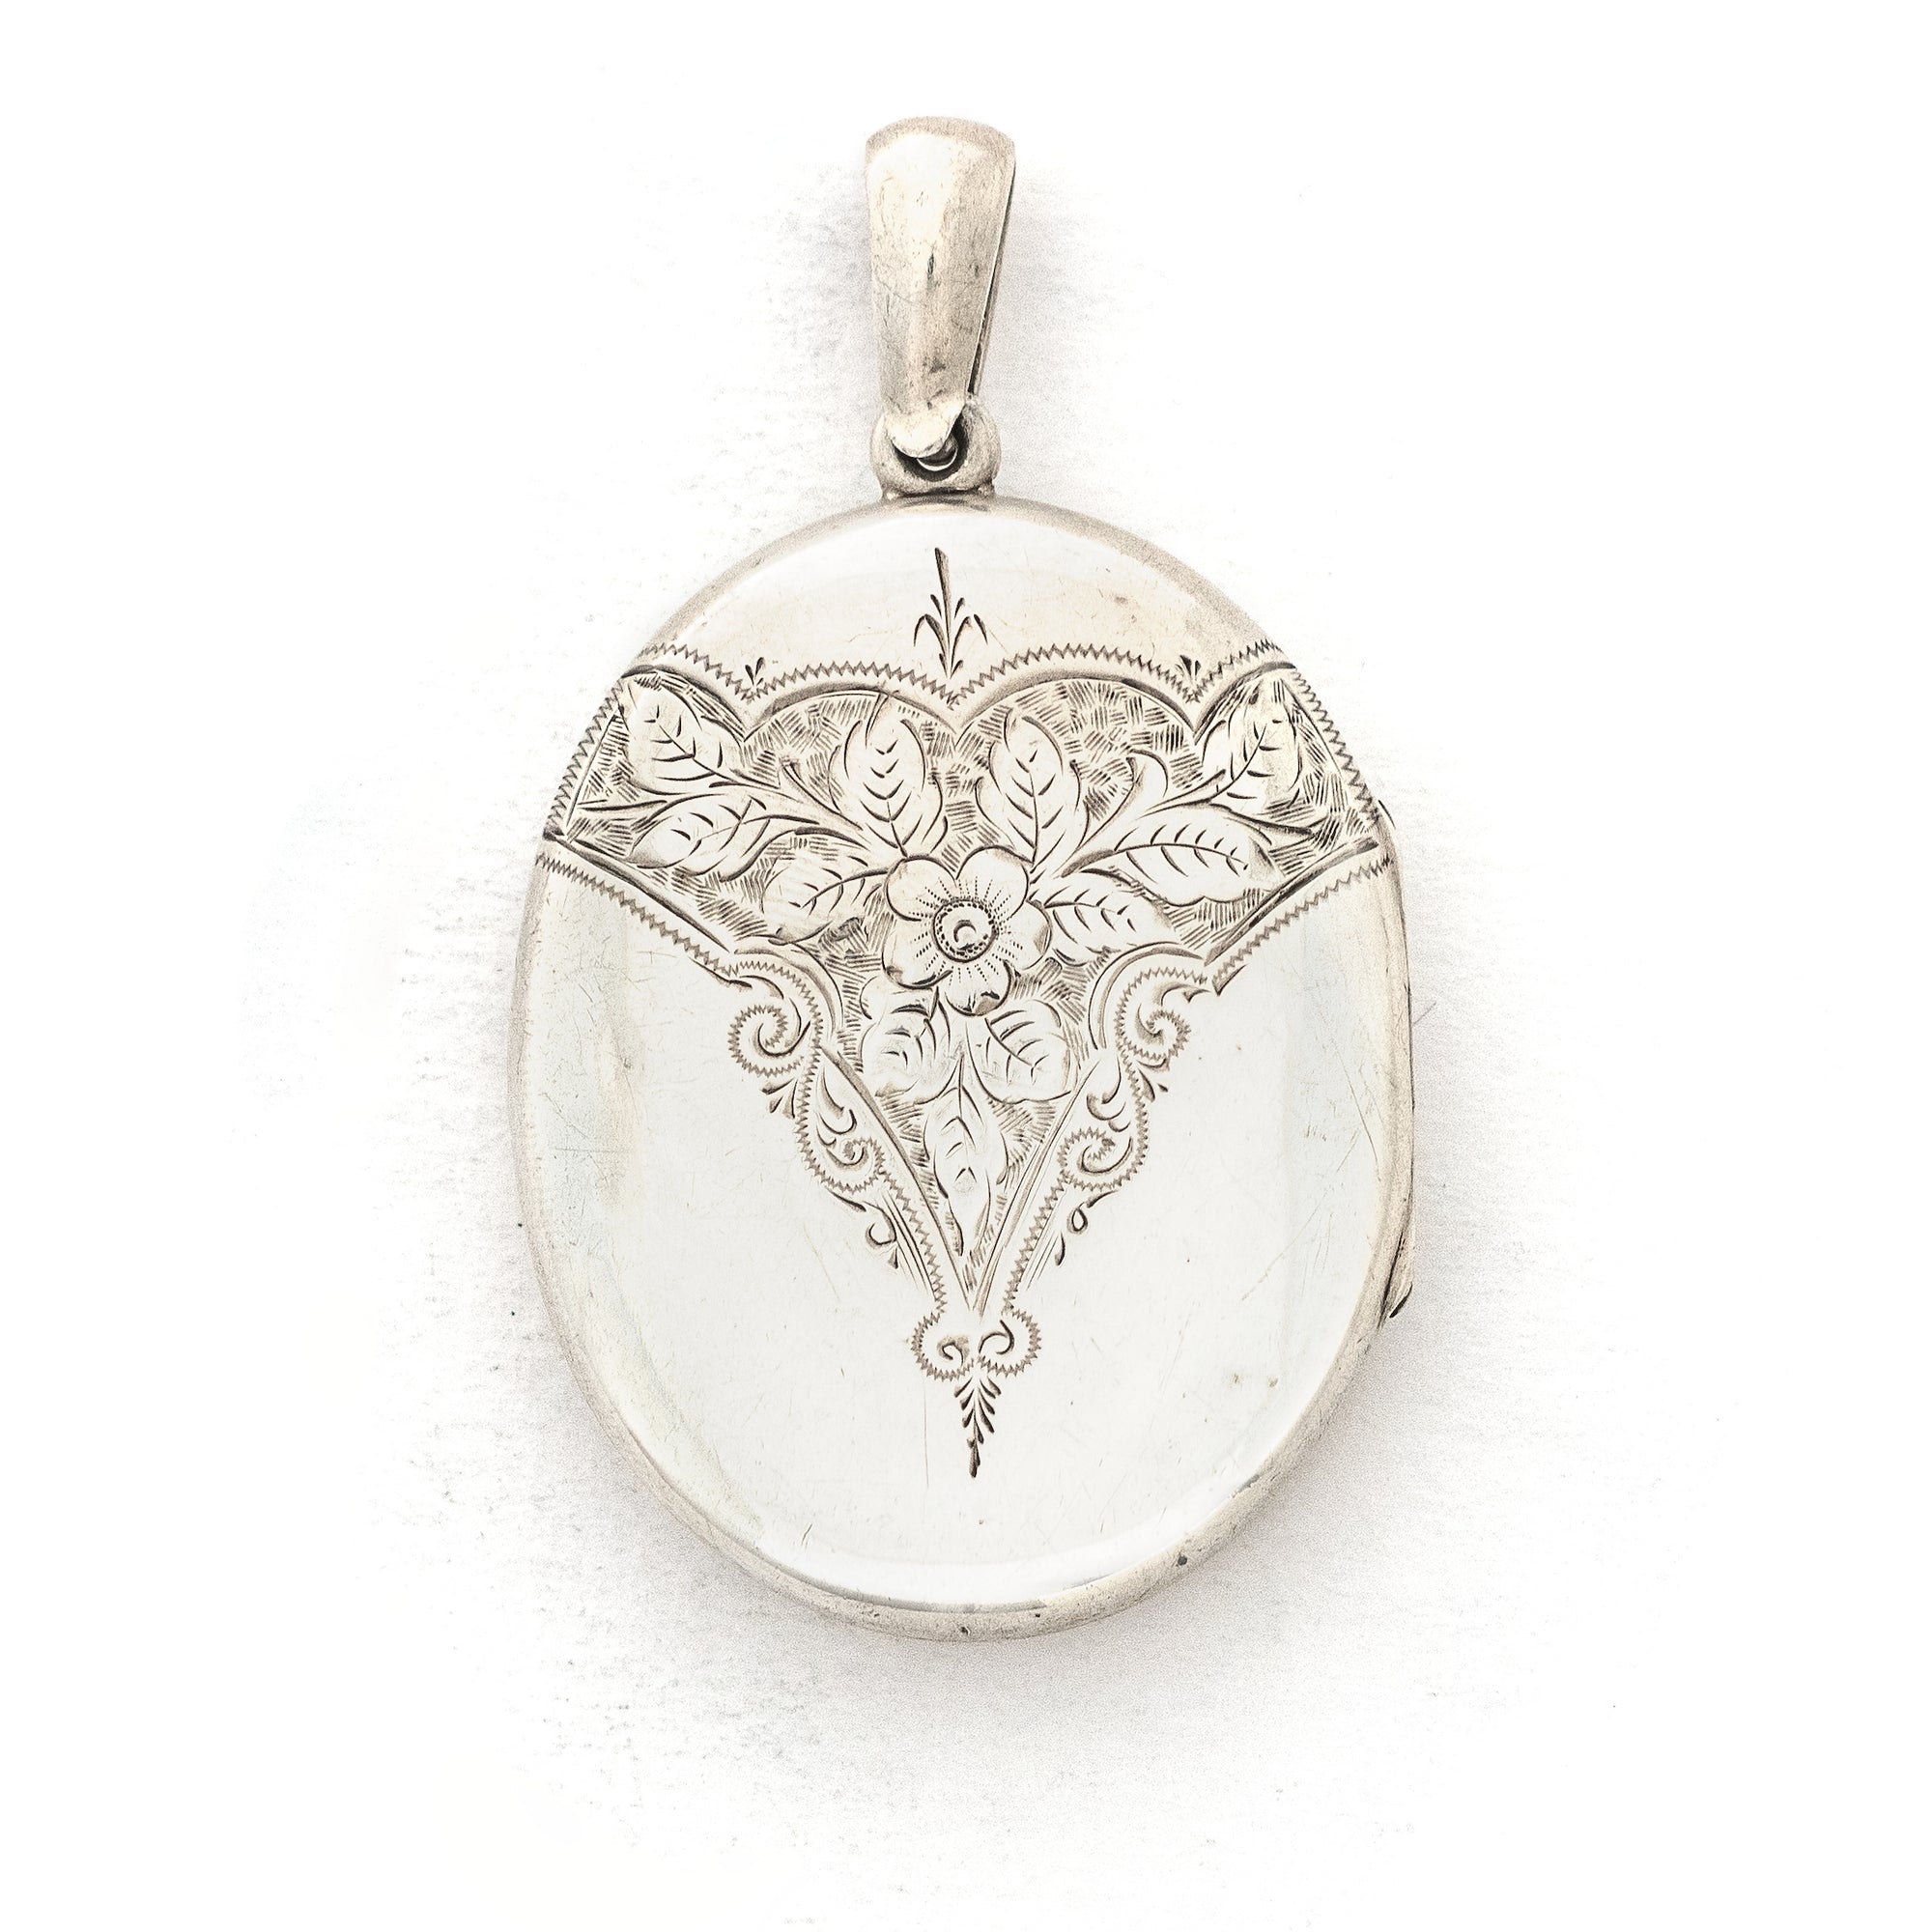 This large sterling silver oval locket features the classic Victorian symbol, a forget-me-not flower surrounded by greenery in a dramatic deep V shape and opens to hold two photos. We have paired this locket with an exquisite engraved Victorian sterling silver book chain from the same era. Front Locket view